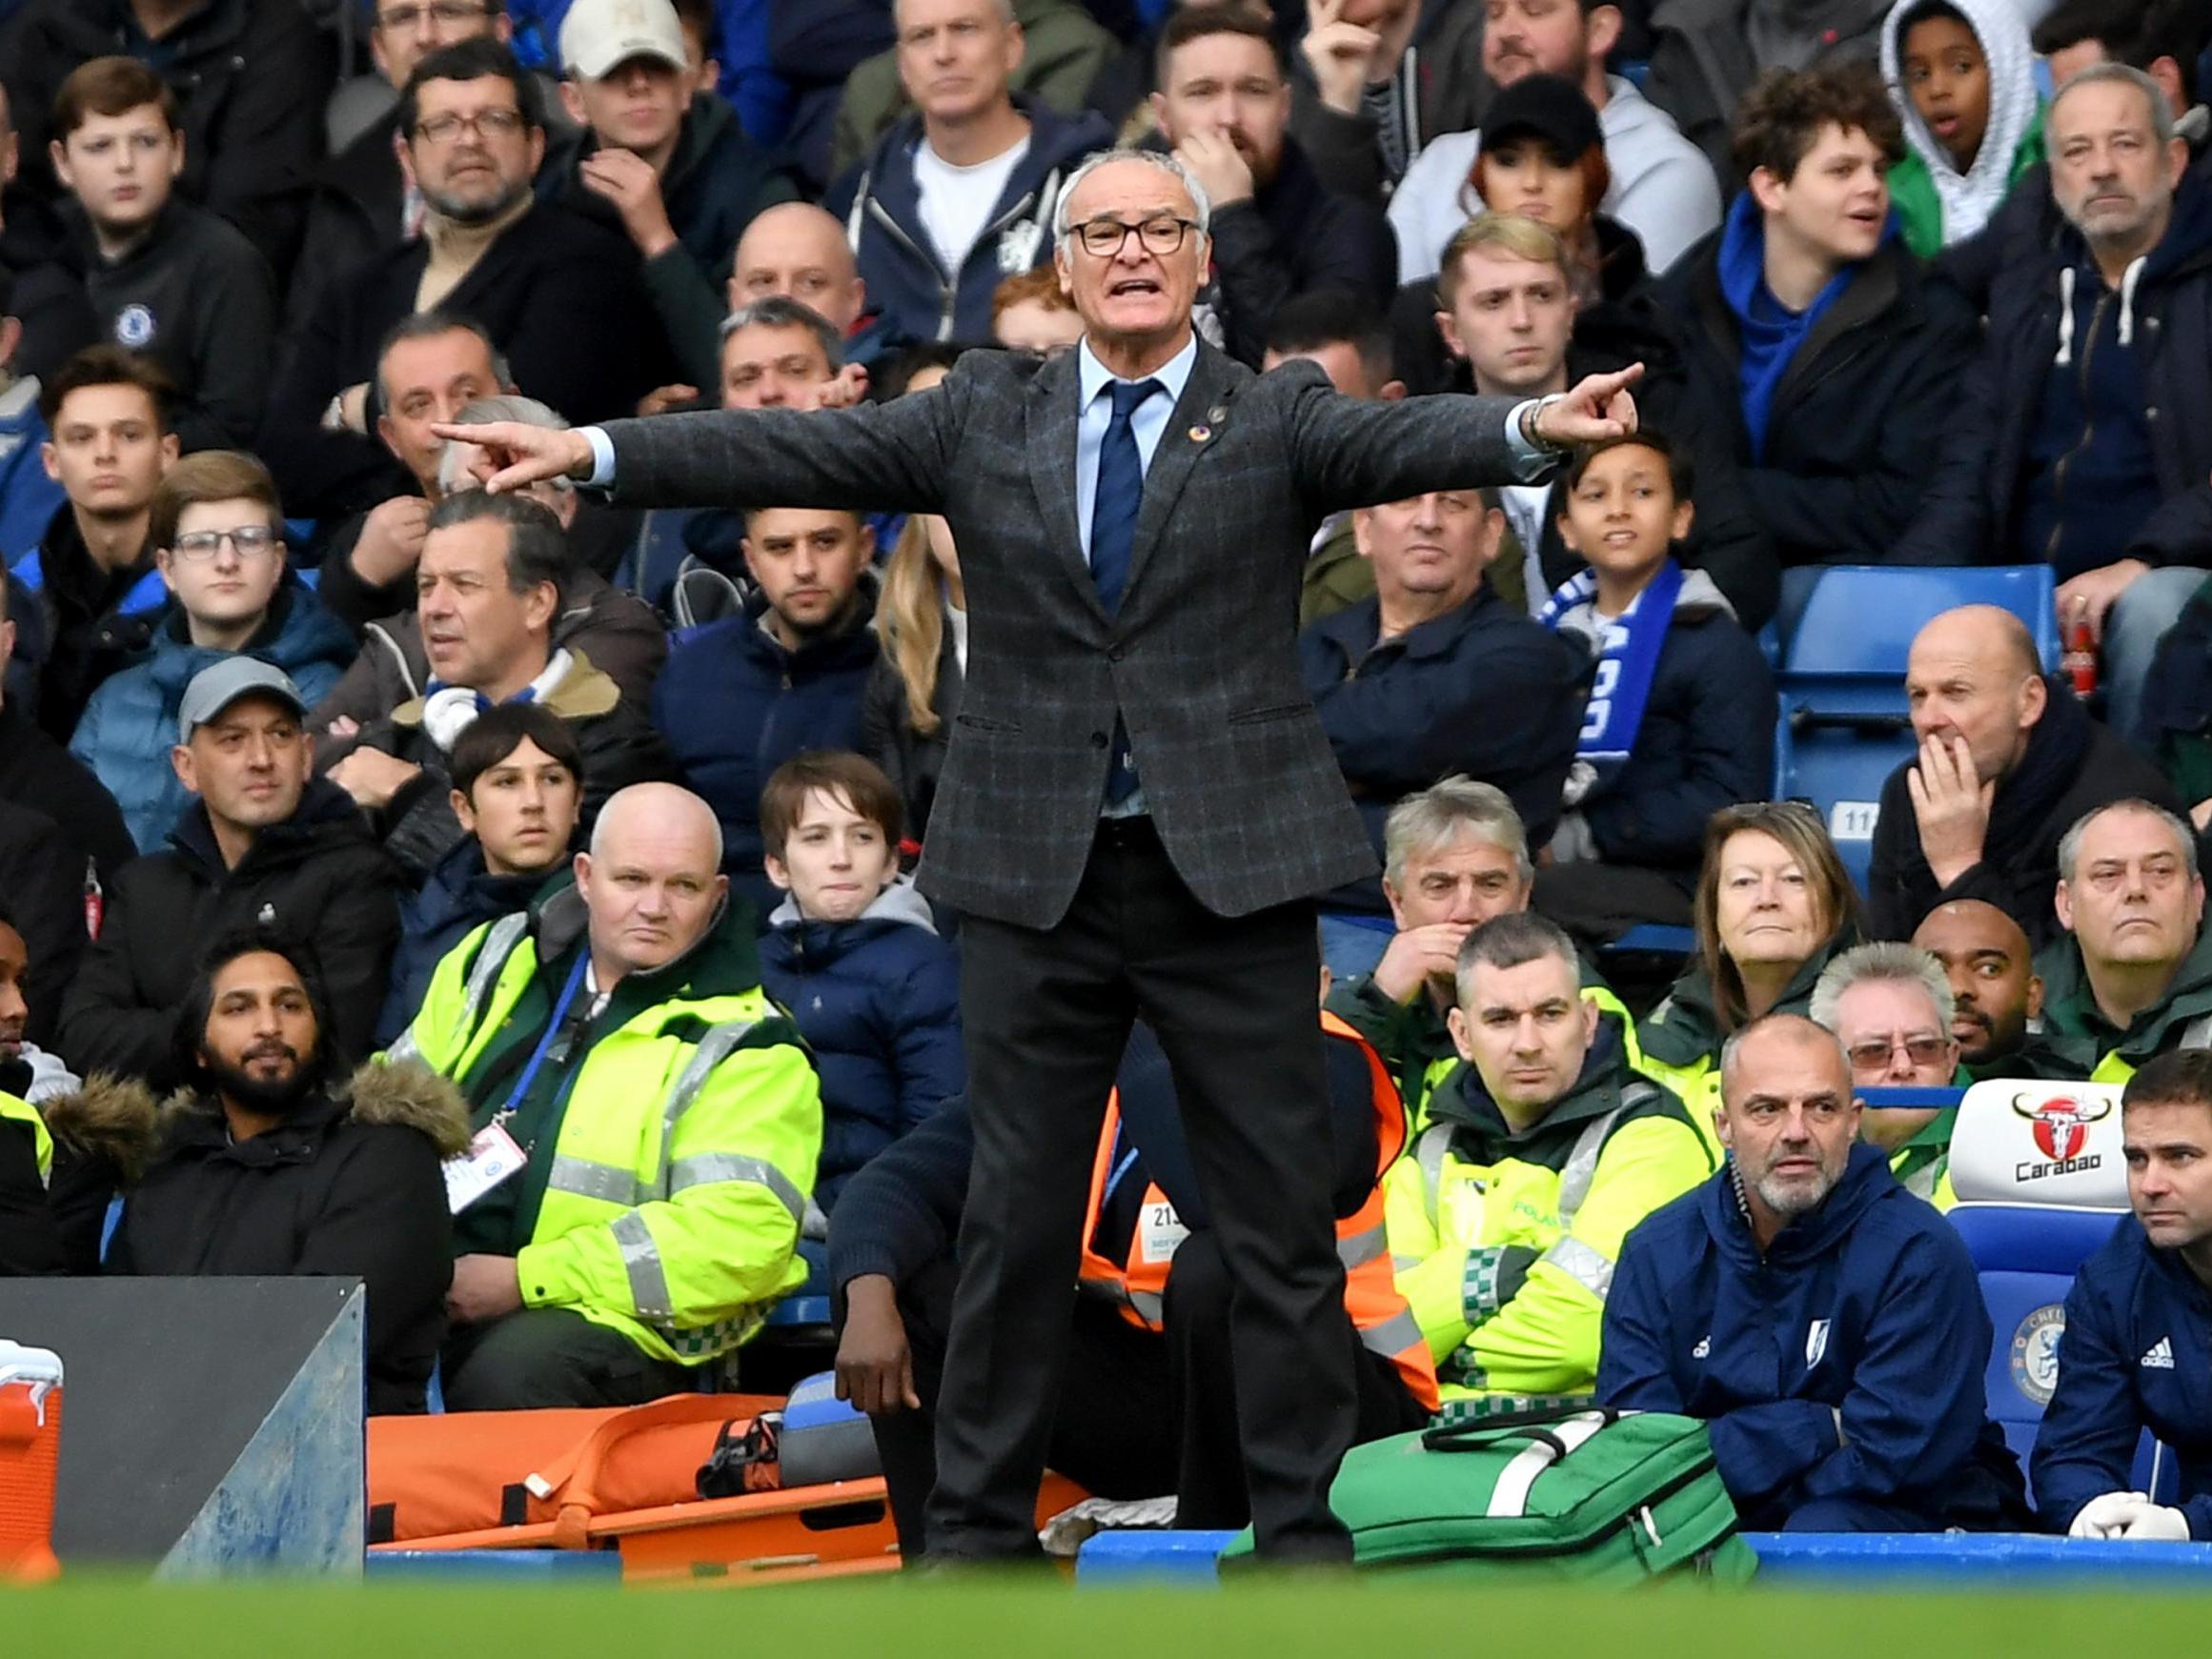 Claudio Ranieri issues instructions from the sideline at Stamford Bridge